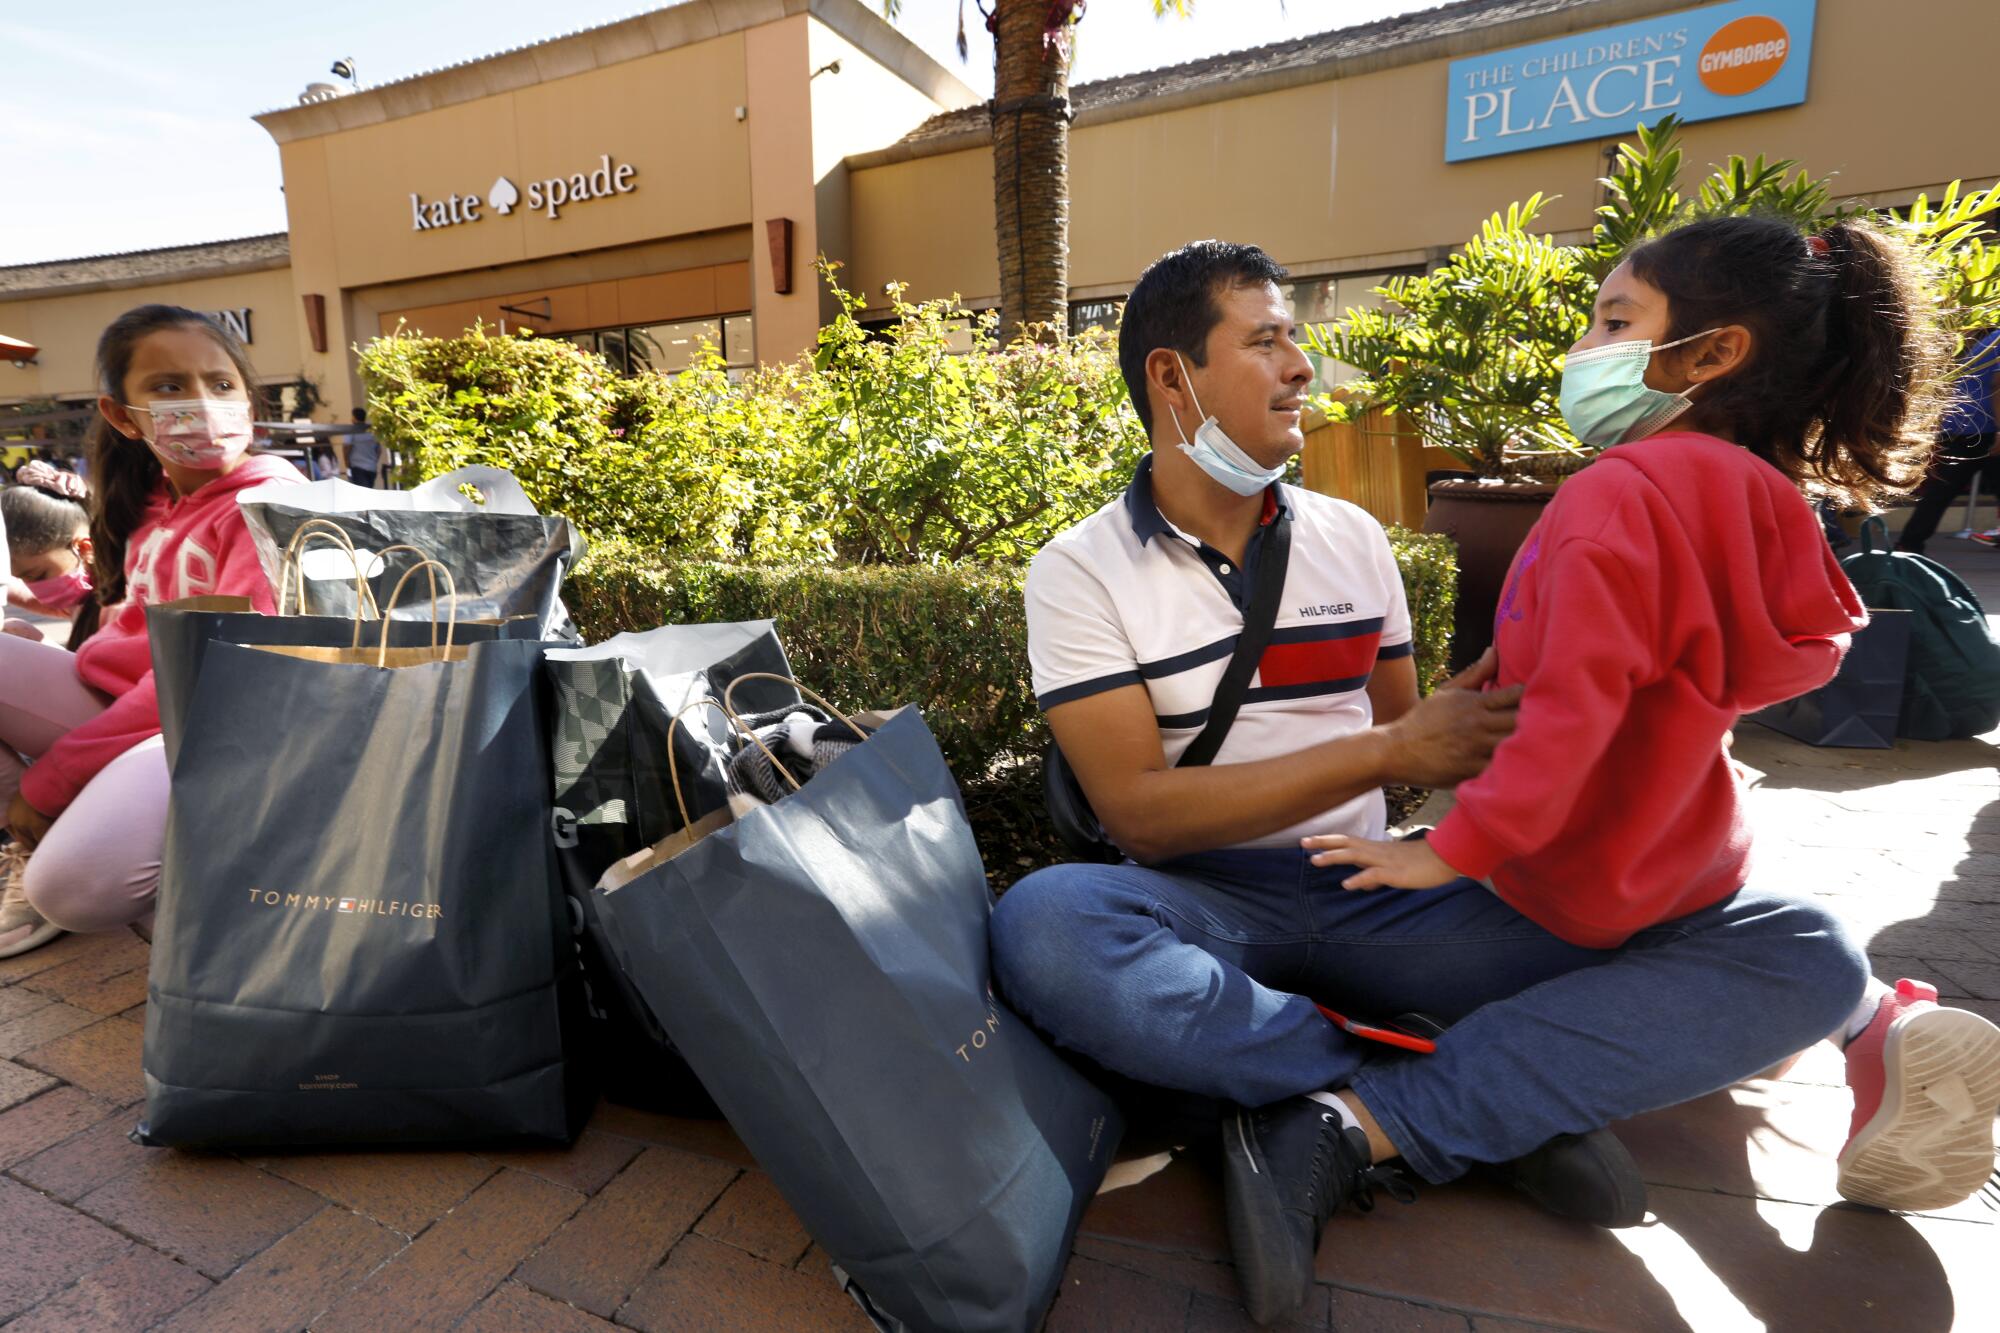 With their slew of shopping bags, Juan Vasquez, of Guadalajara, Mexico, and his family take a break at the Citadel Outlets